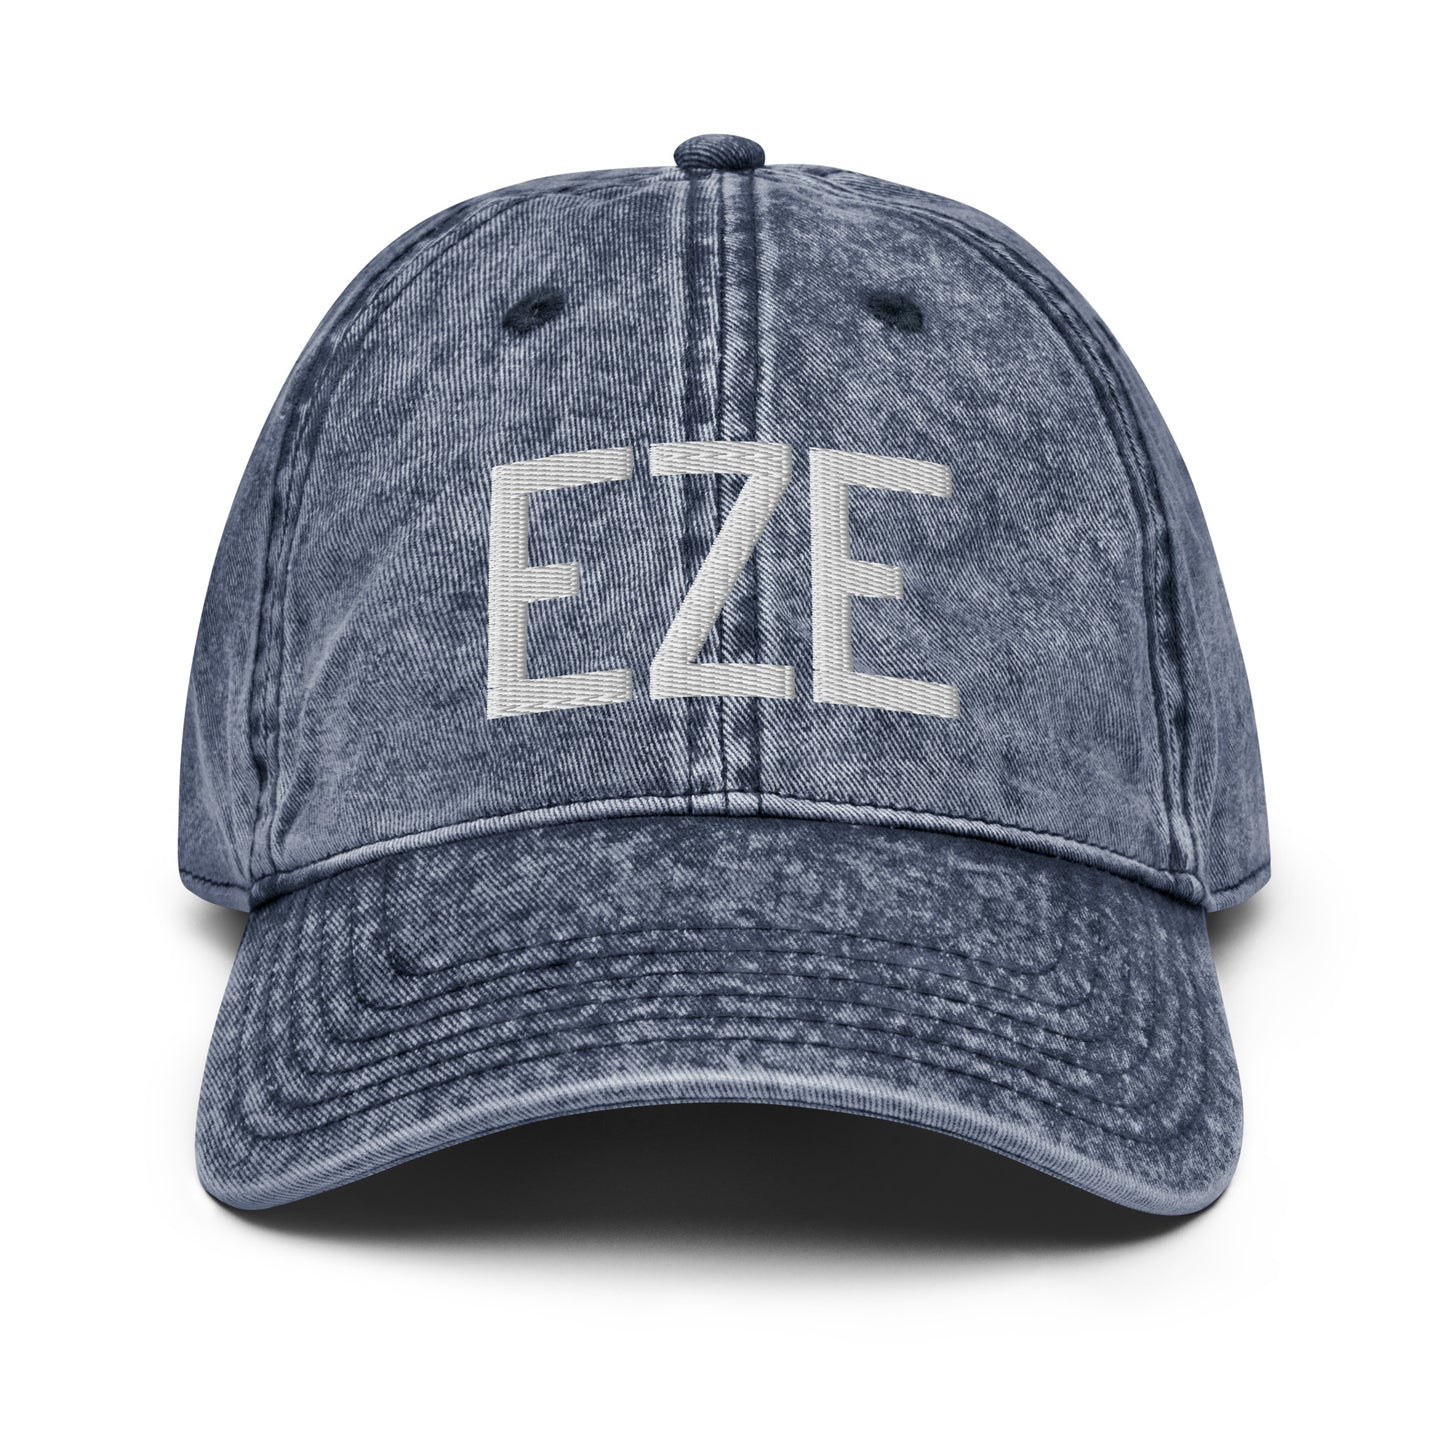 Airport Code Twill Cap - White • EZE Buenos Aires • YHM Designs - Image 16